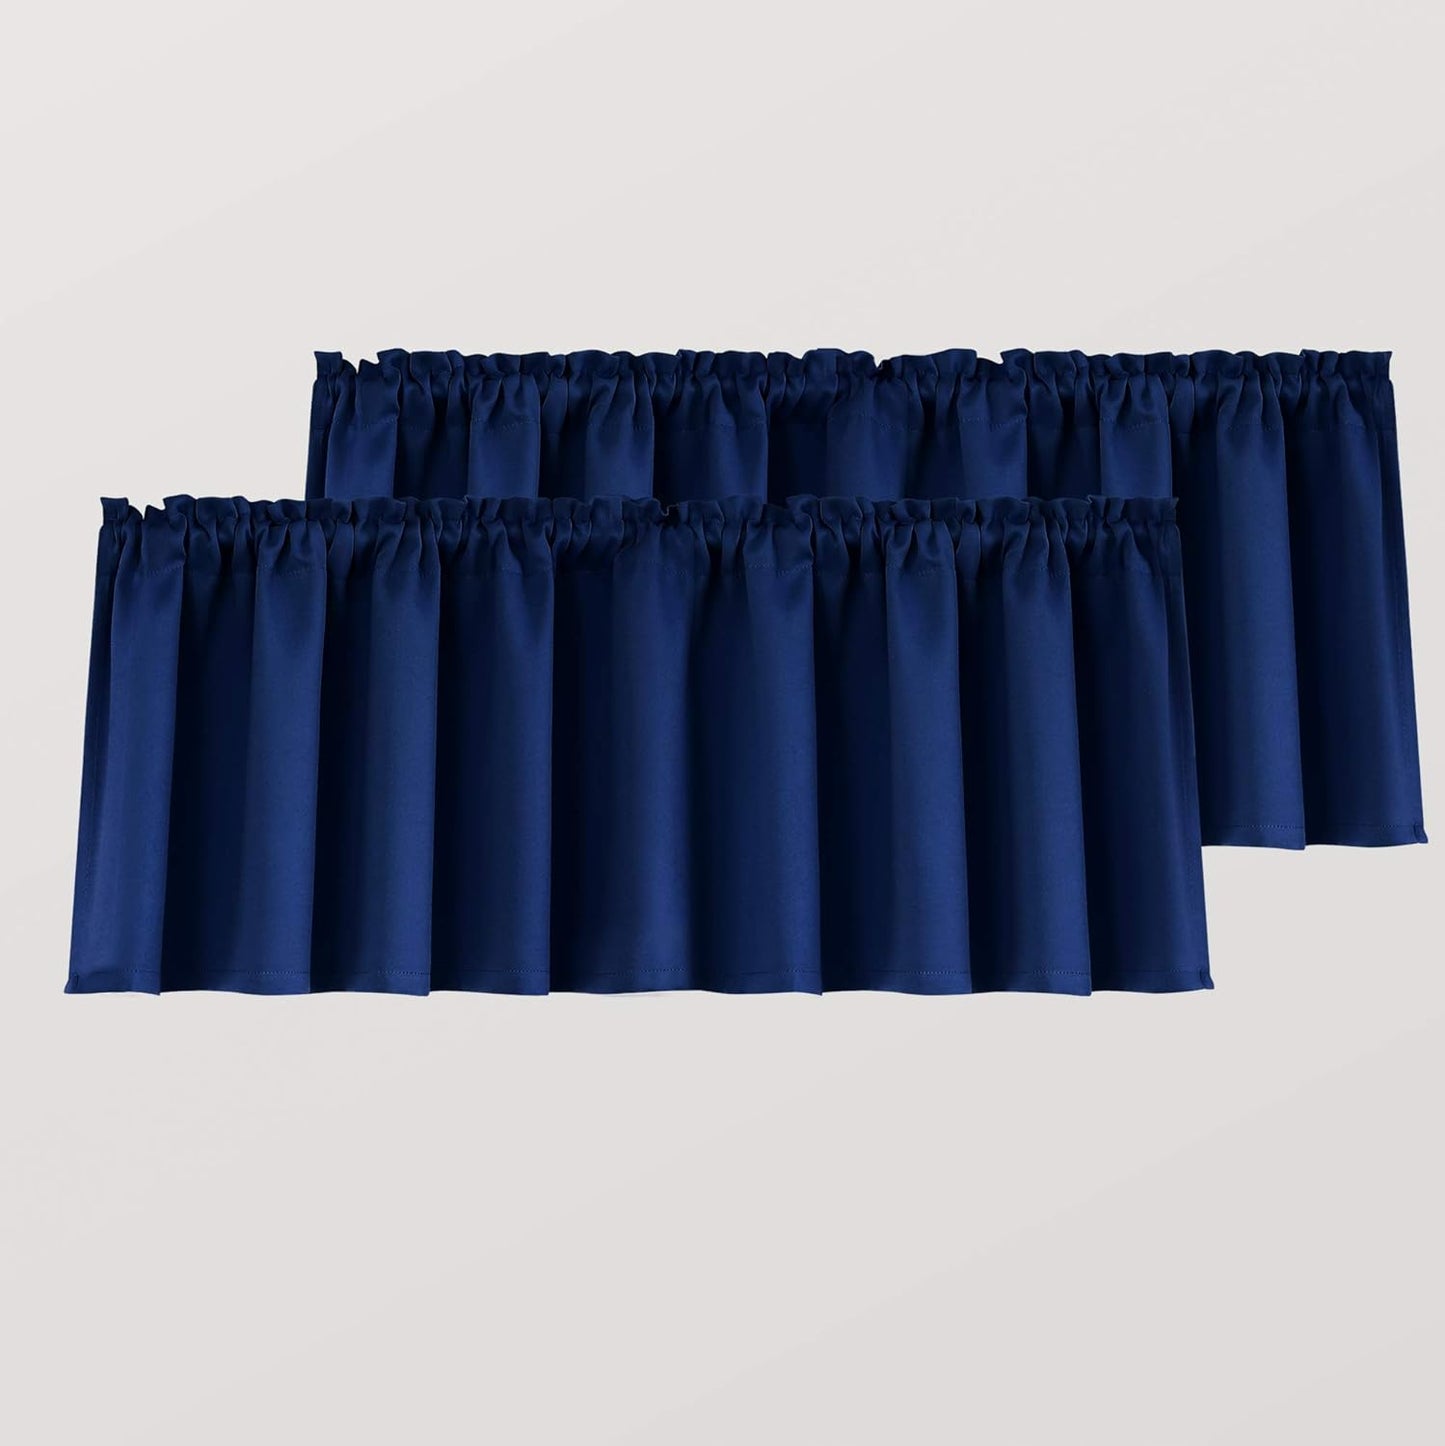 Mrs.Naturall Beige Valance Curtains for Windows 36X16 Inch Length  MRS.NATURALL TEXTILE Navy Blue 36X16 